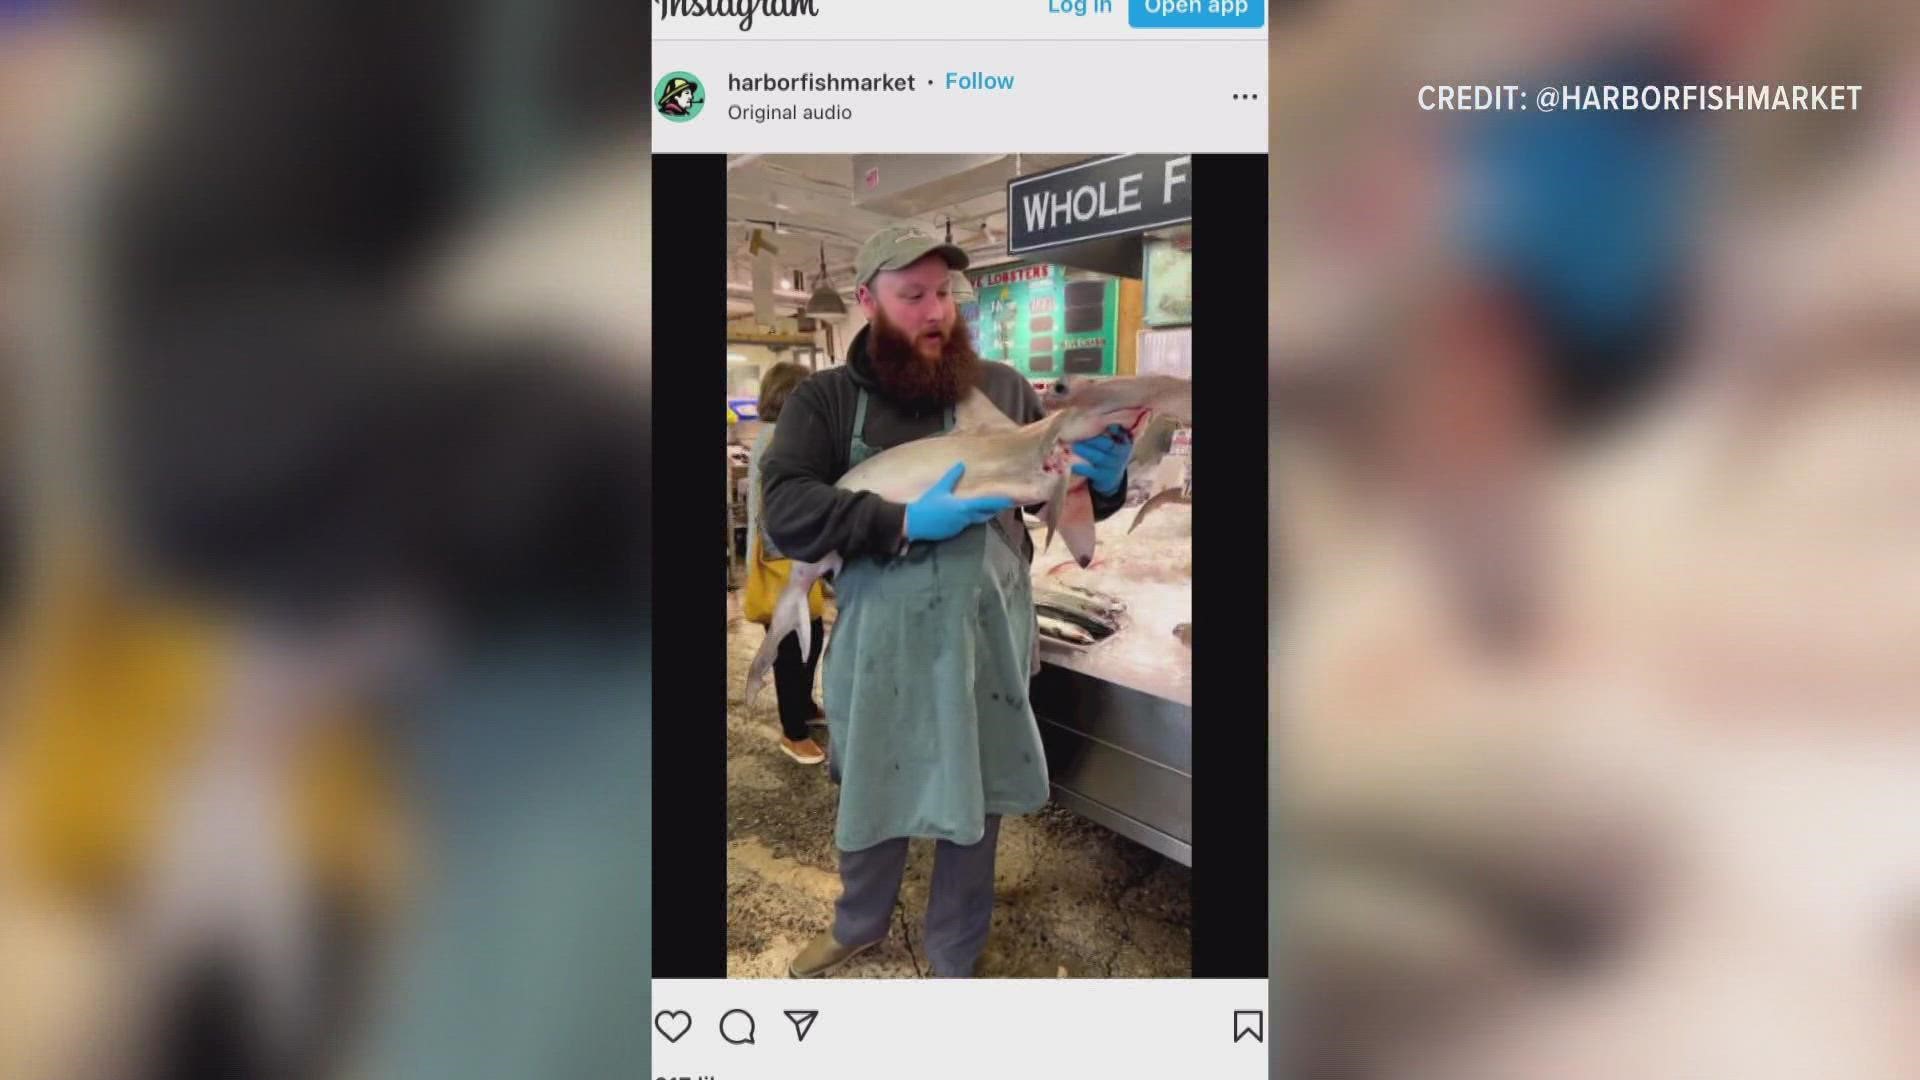 The video was posted this week on the Harbor Fish Market Instagram account.